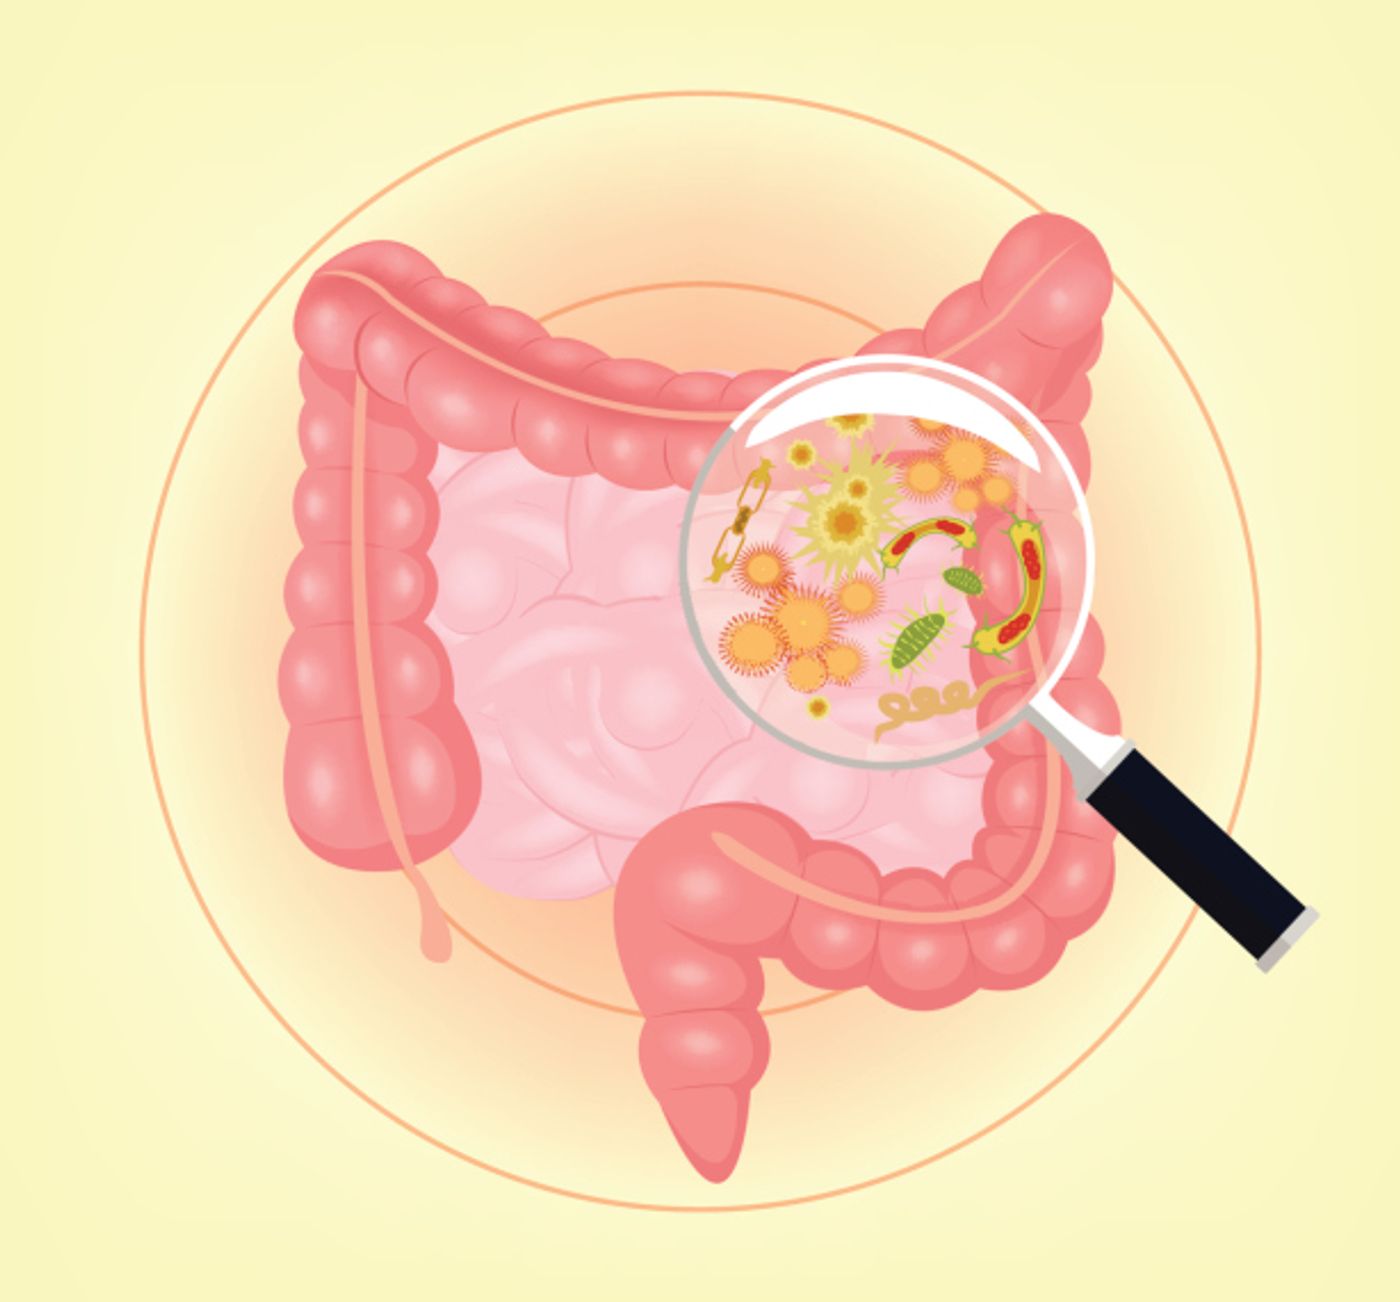 Probiotics may keep your microbiome healthy.